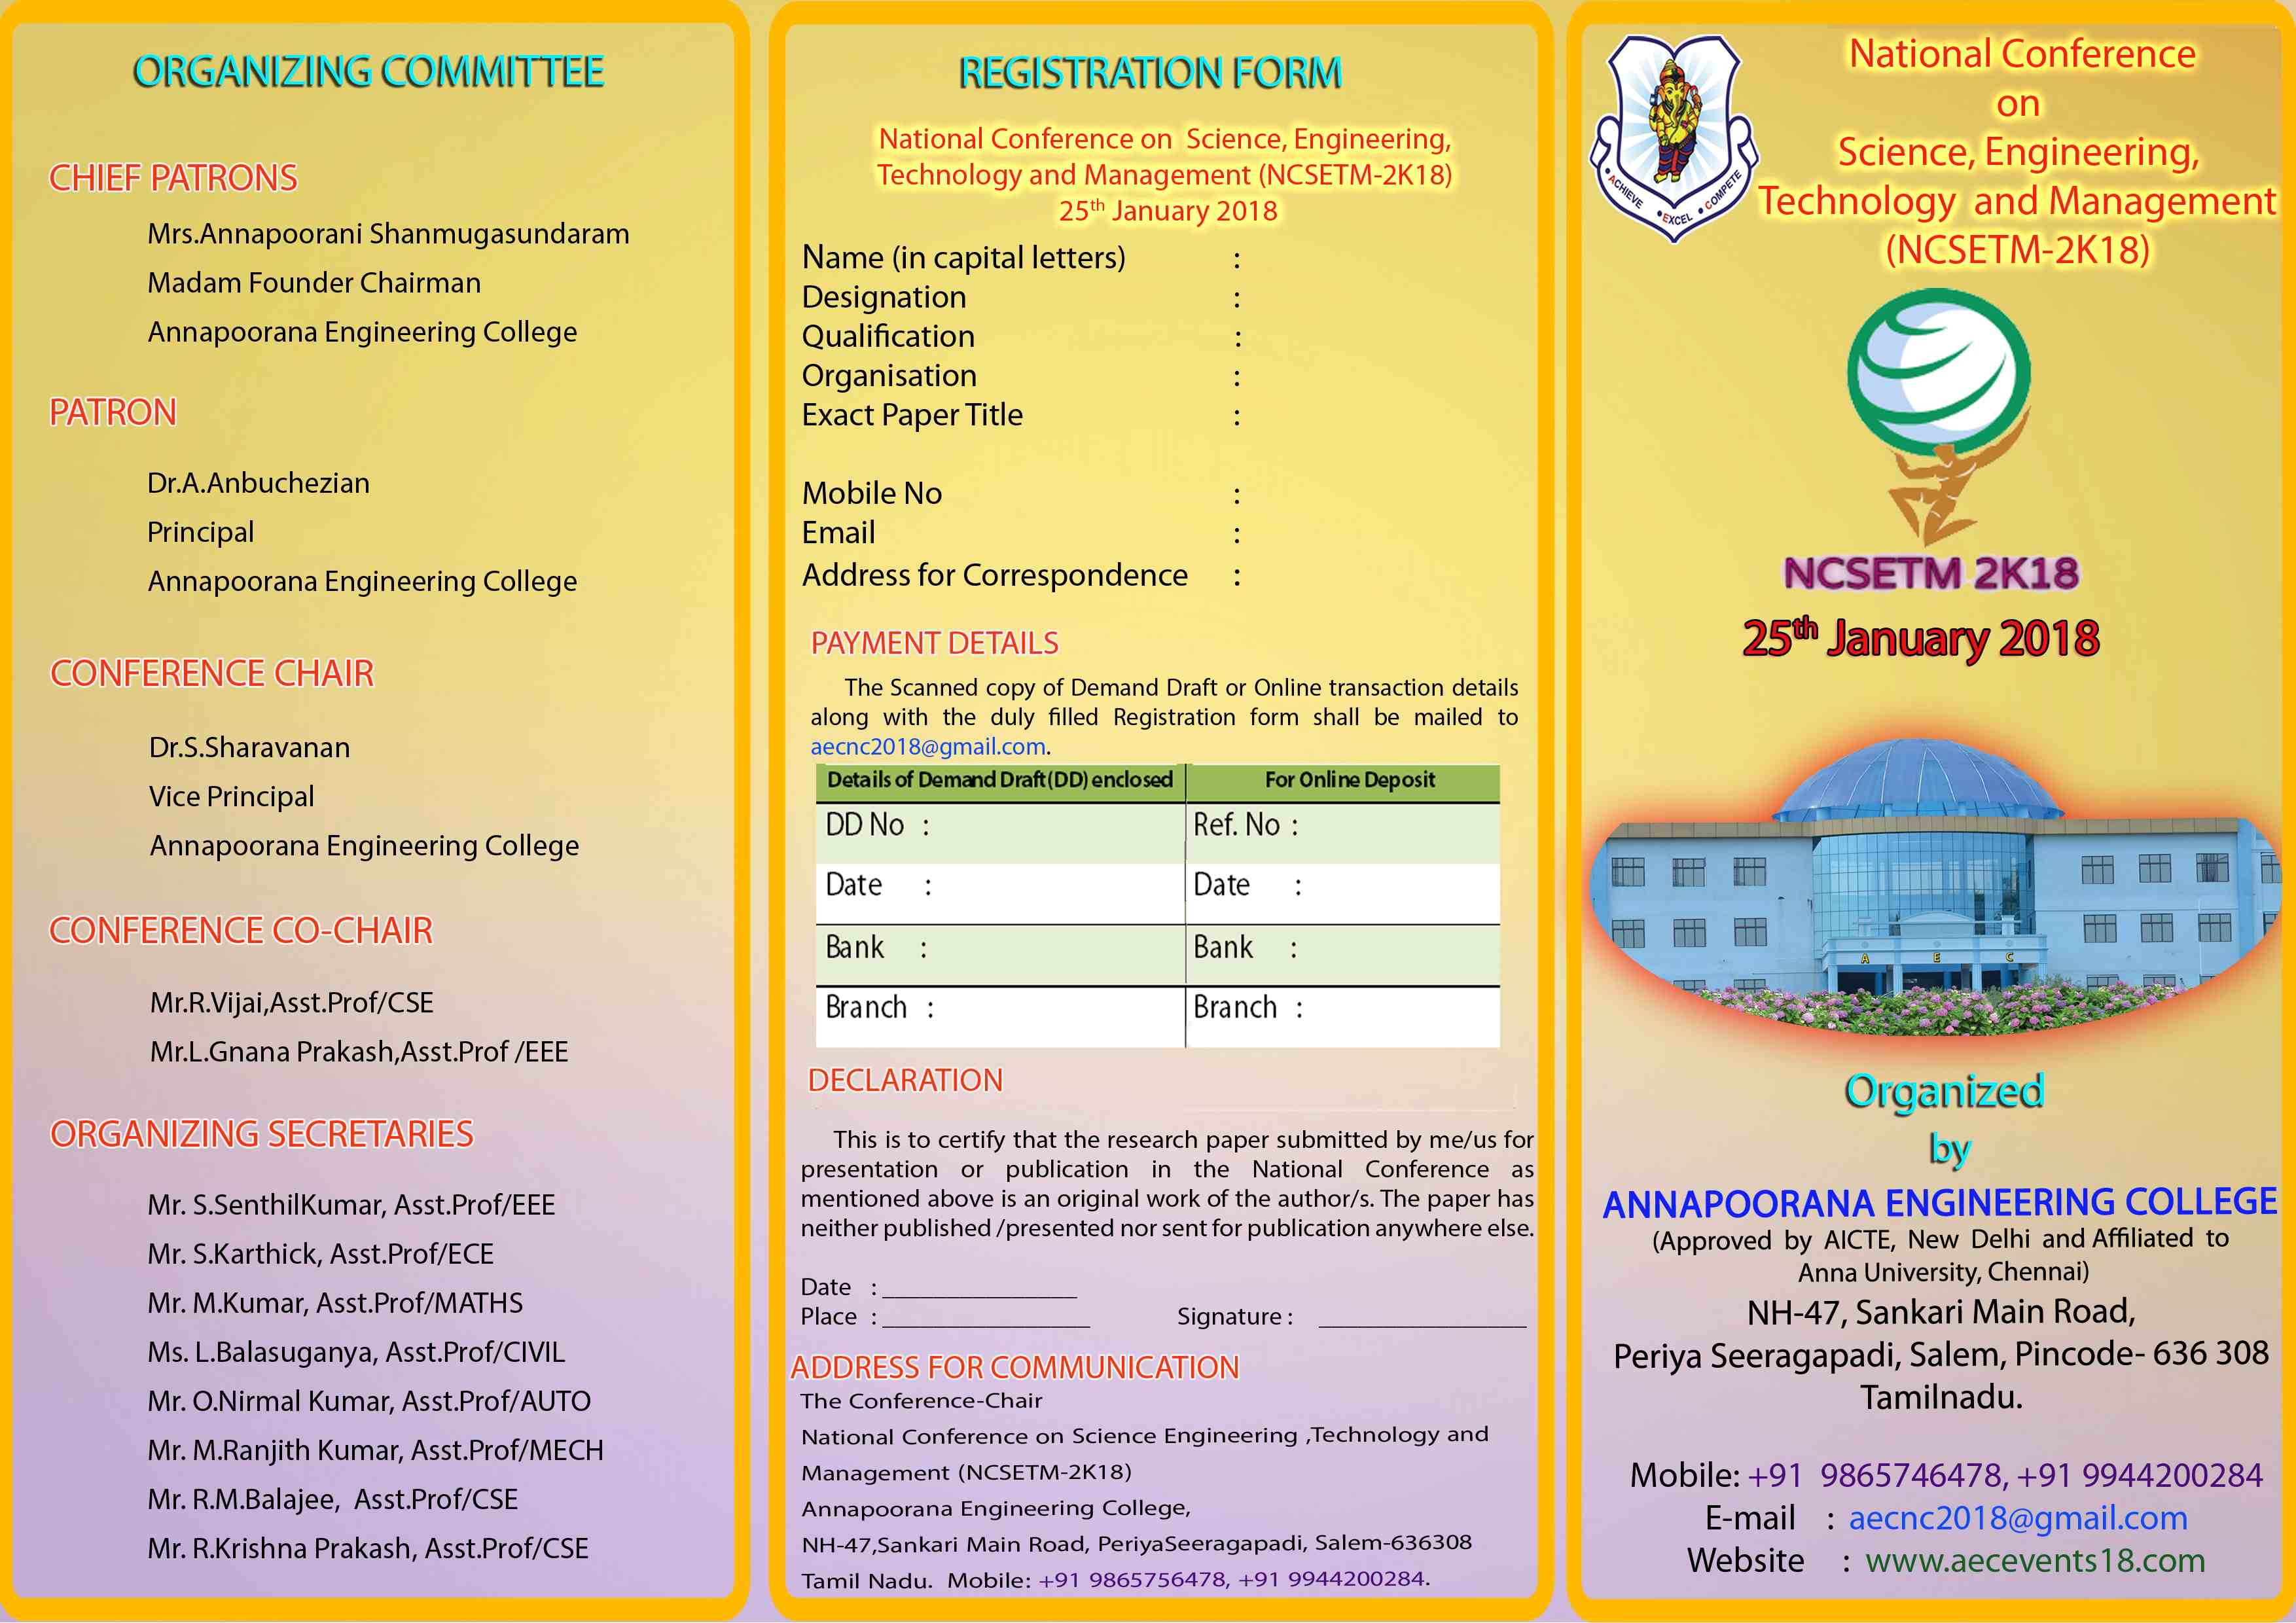 National Conference on Innovations in Science, Engineering, Technology and Management 2018